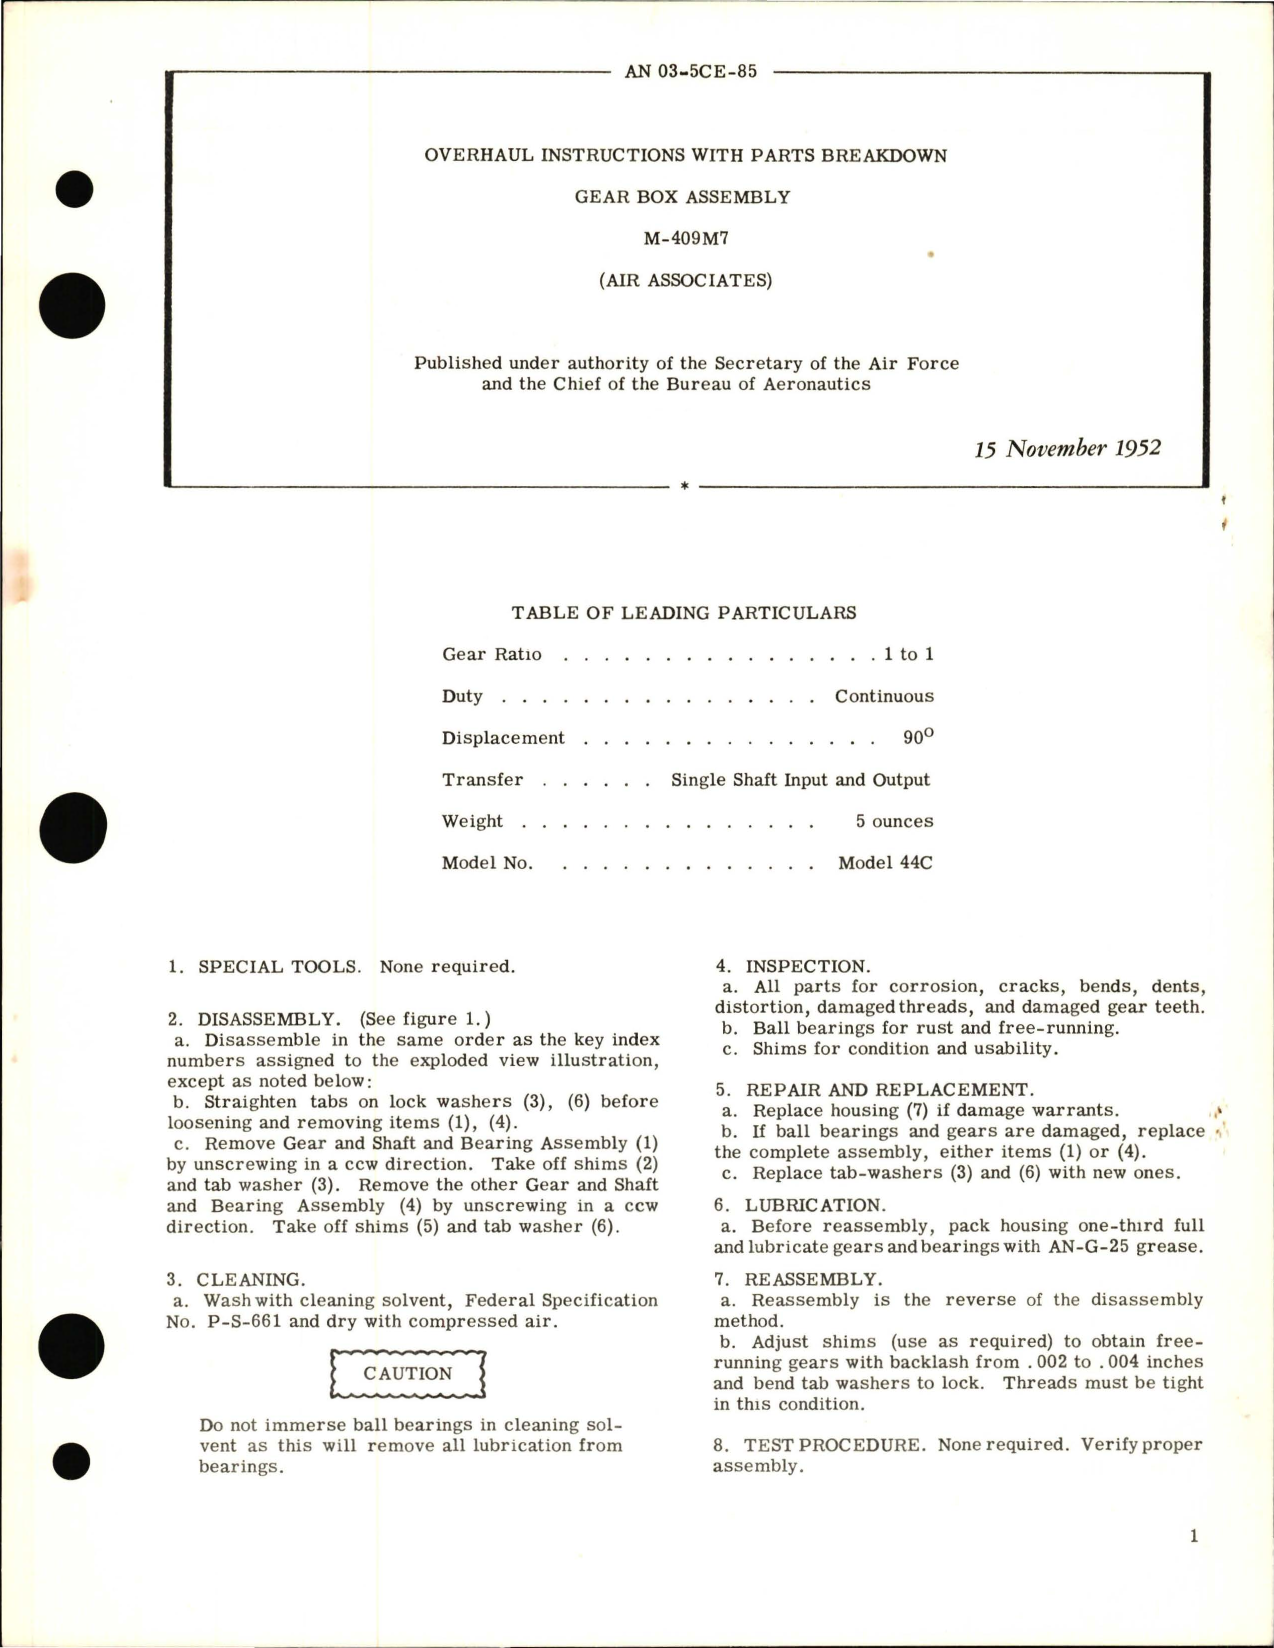 Sample page 1 from AirCorps Library document: Overhaul Instructions with Parts Breakdown for Gear Box Assembly - M-409M7 